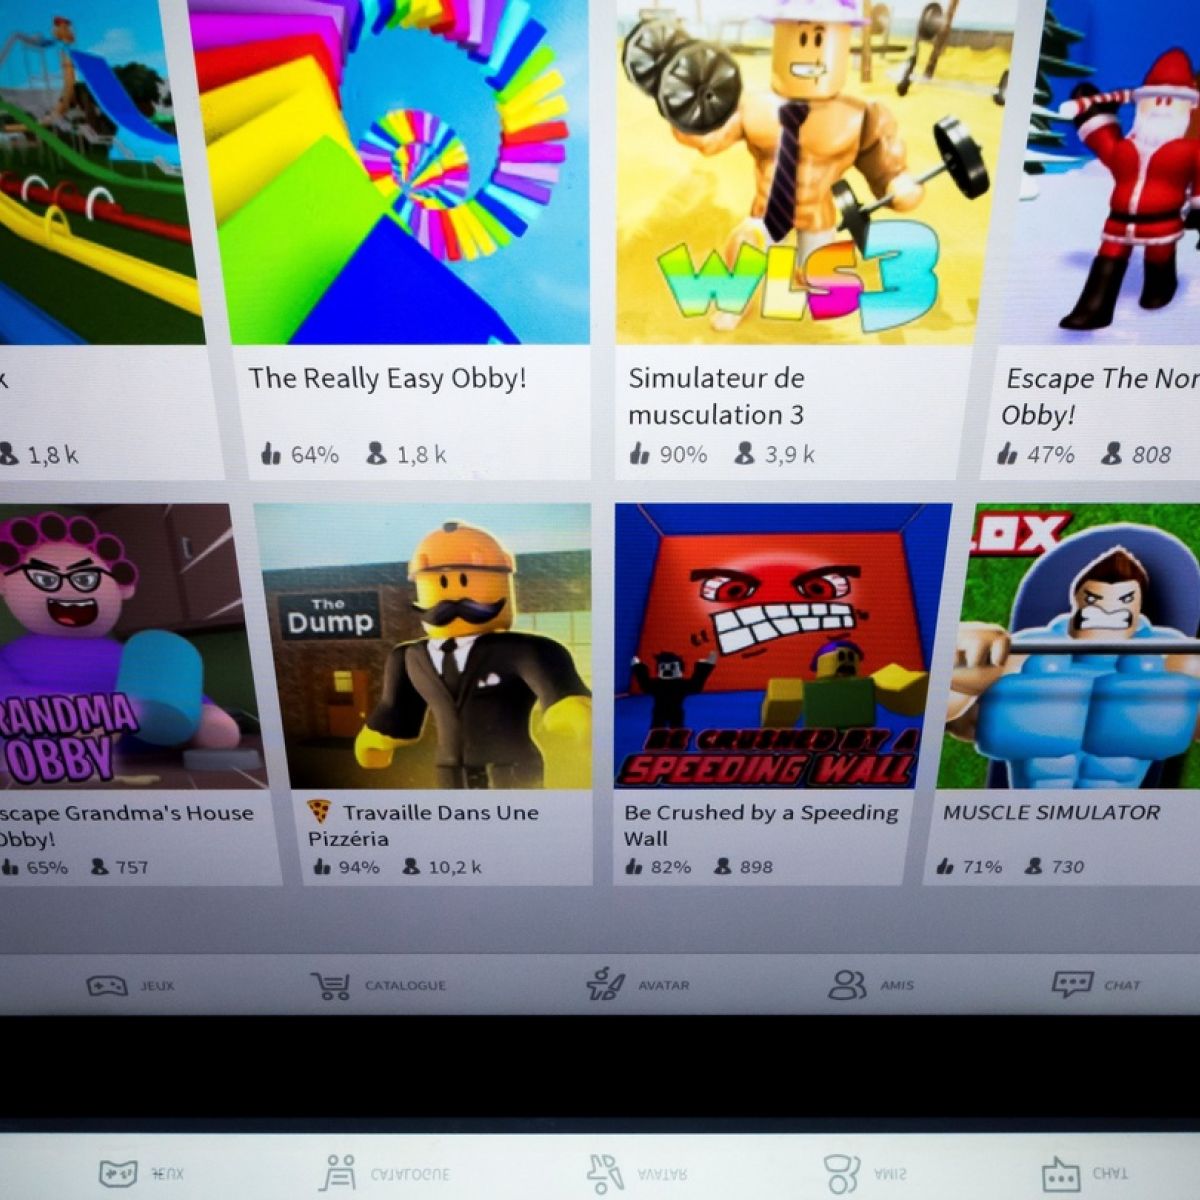 Numbers Playing Preteen Video Game Roblox Surge During Covid 19 Lockdowns - how to see sales on roblox